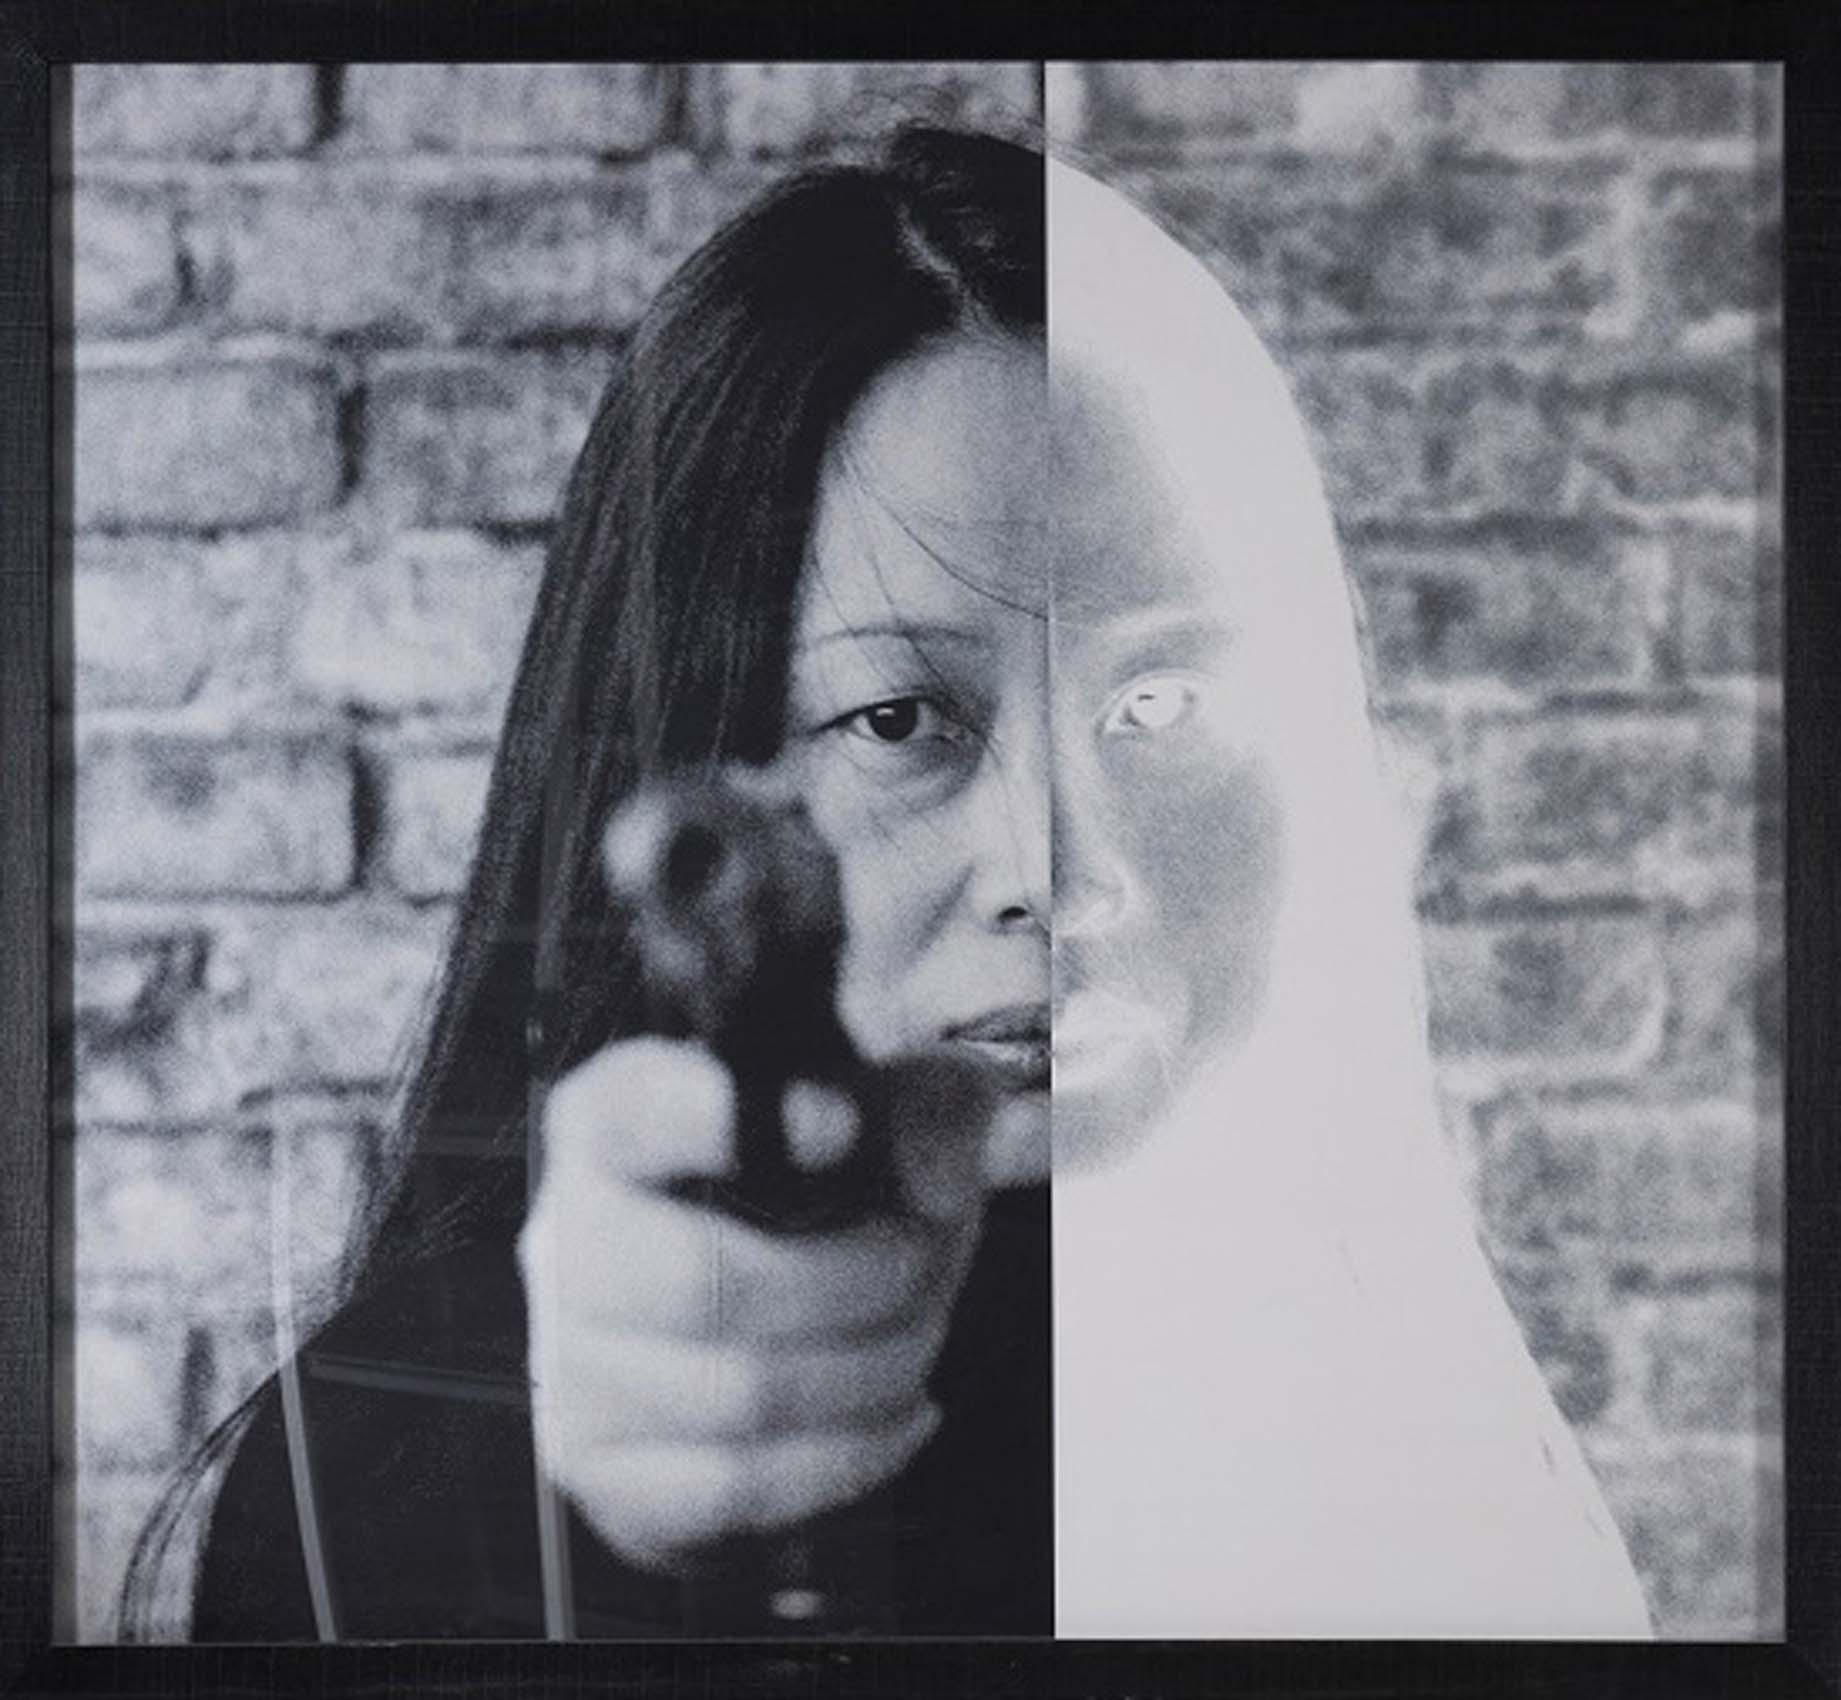 Xiao Lu, ‘Dialogue’, 2004, photographic print on aluminium. La Trobe University, Geoff Raby Collection of Chinese Art. Donated by Dr Geoff Raby AO through the Australian Government’s Cultural Gifts Program, 2019. © Xiao Lu. Photo: Jia De